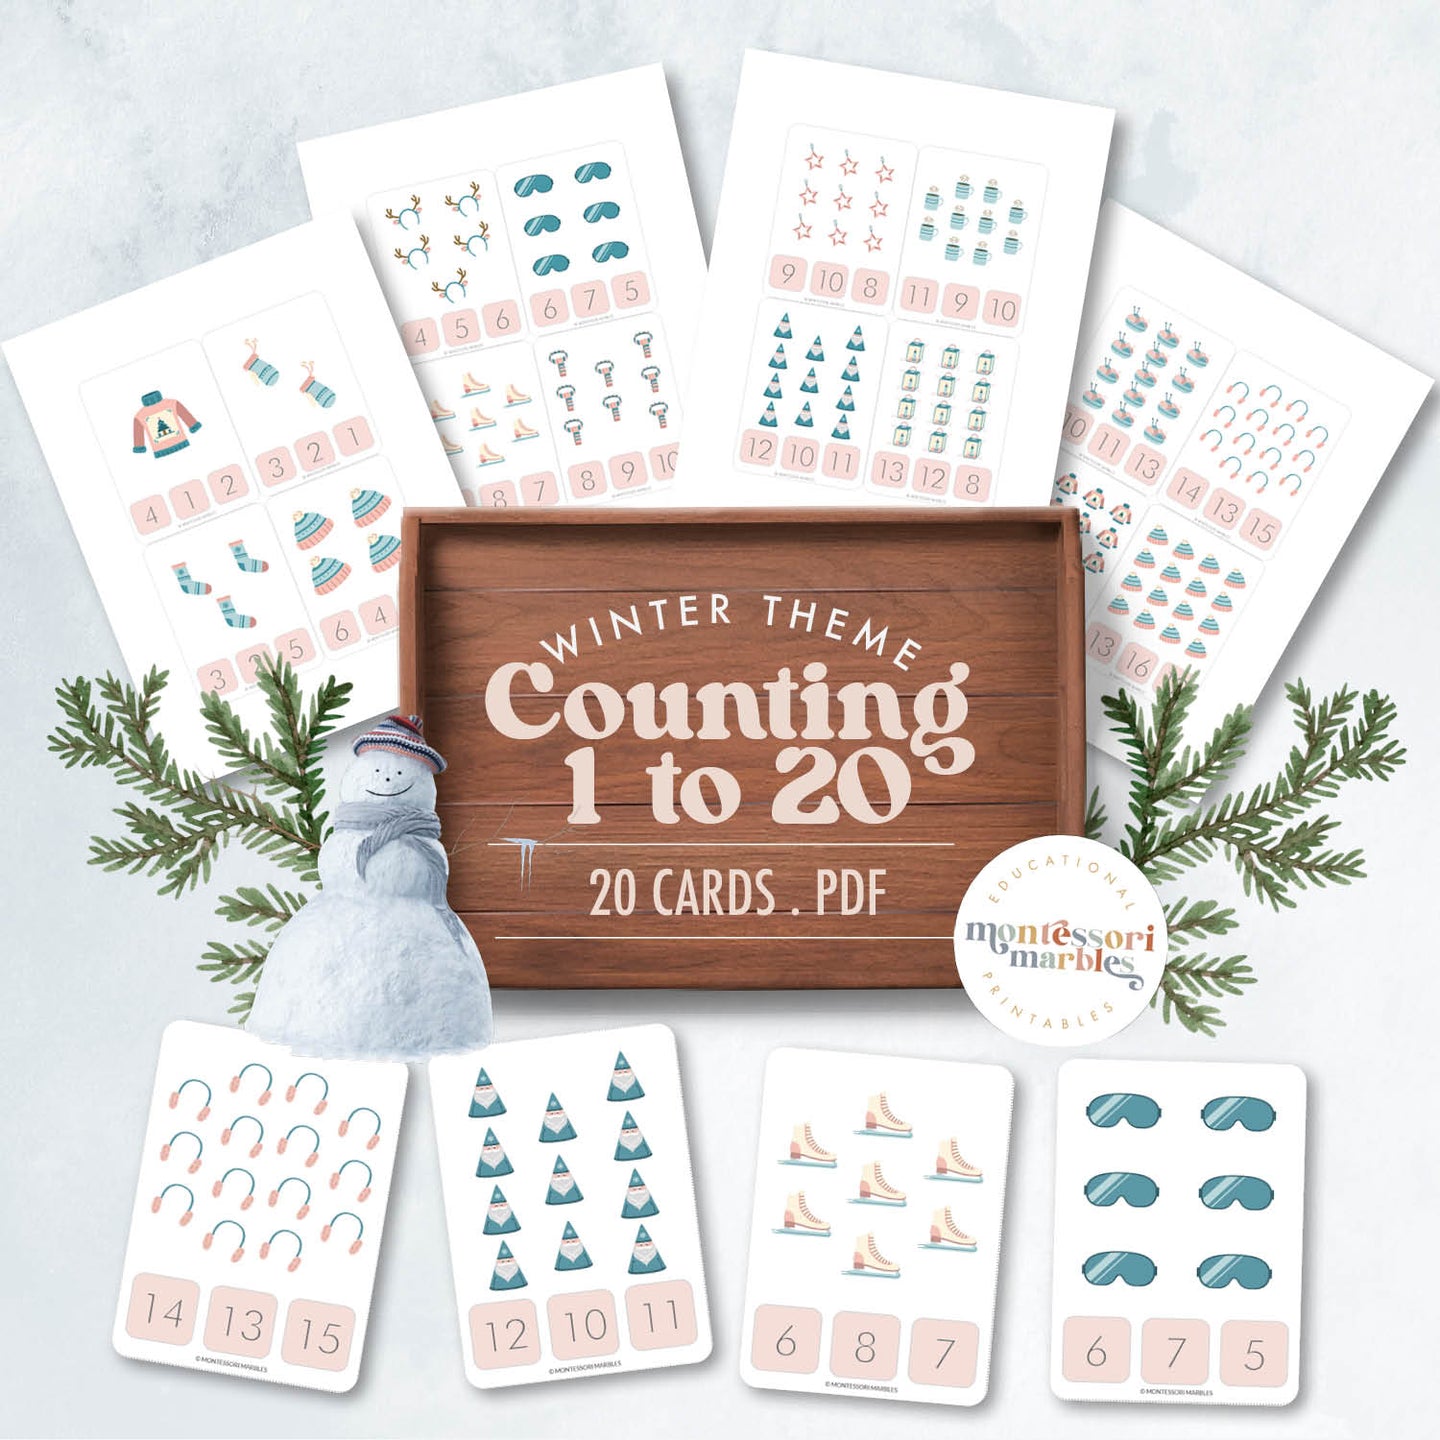 Winter Counting 1 to 20